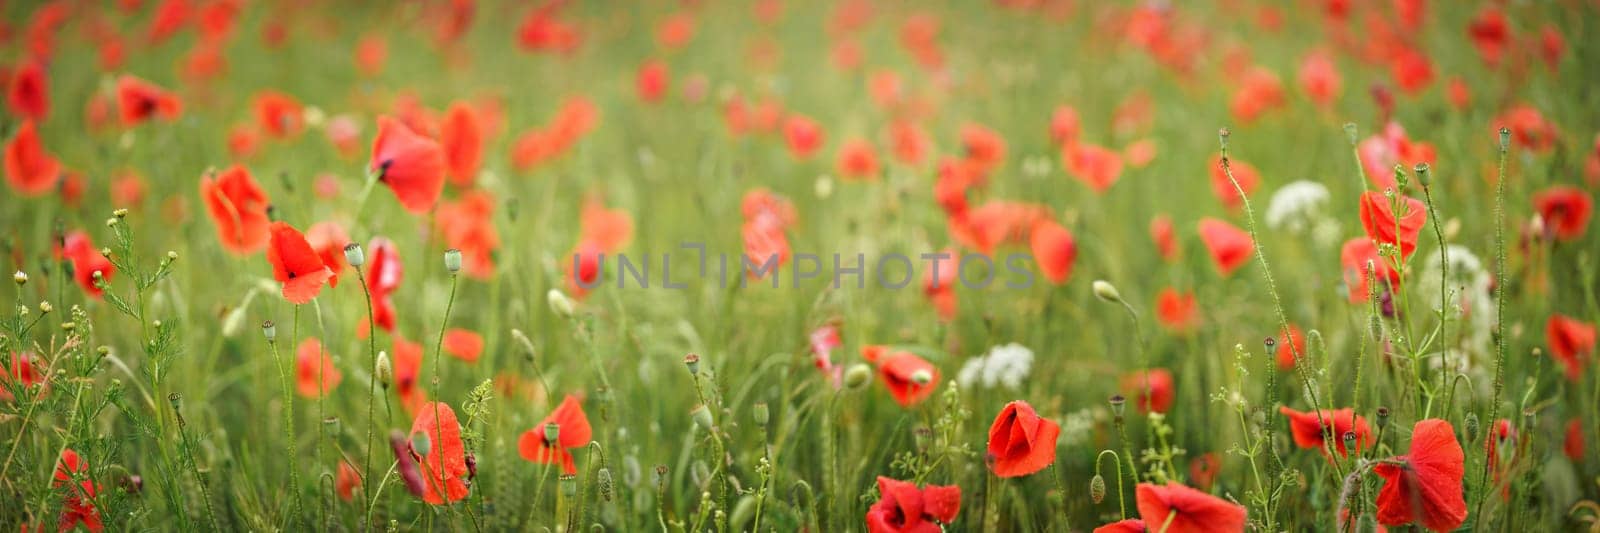 Wild red poppies growing in green wheat. Wide banner with shallow depth of field, only front flowers in focus by Ivanko